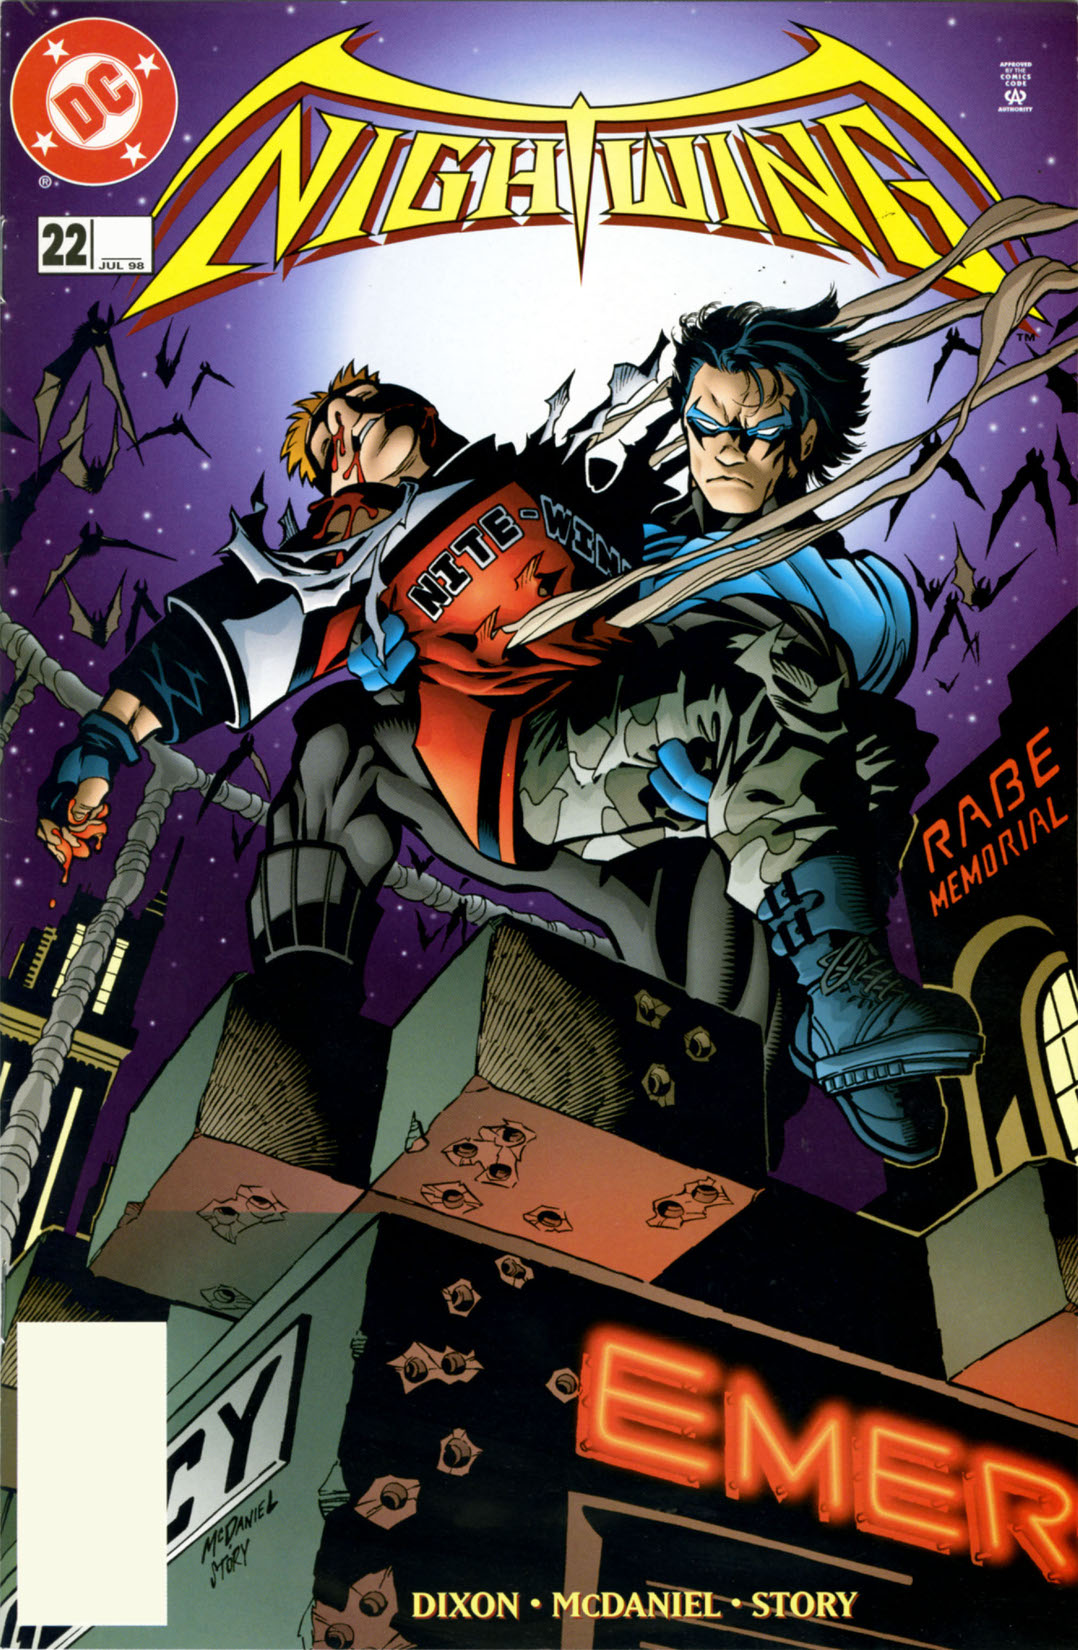 Nightwing (1996-) #22 preview images